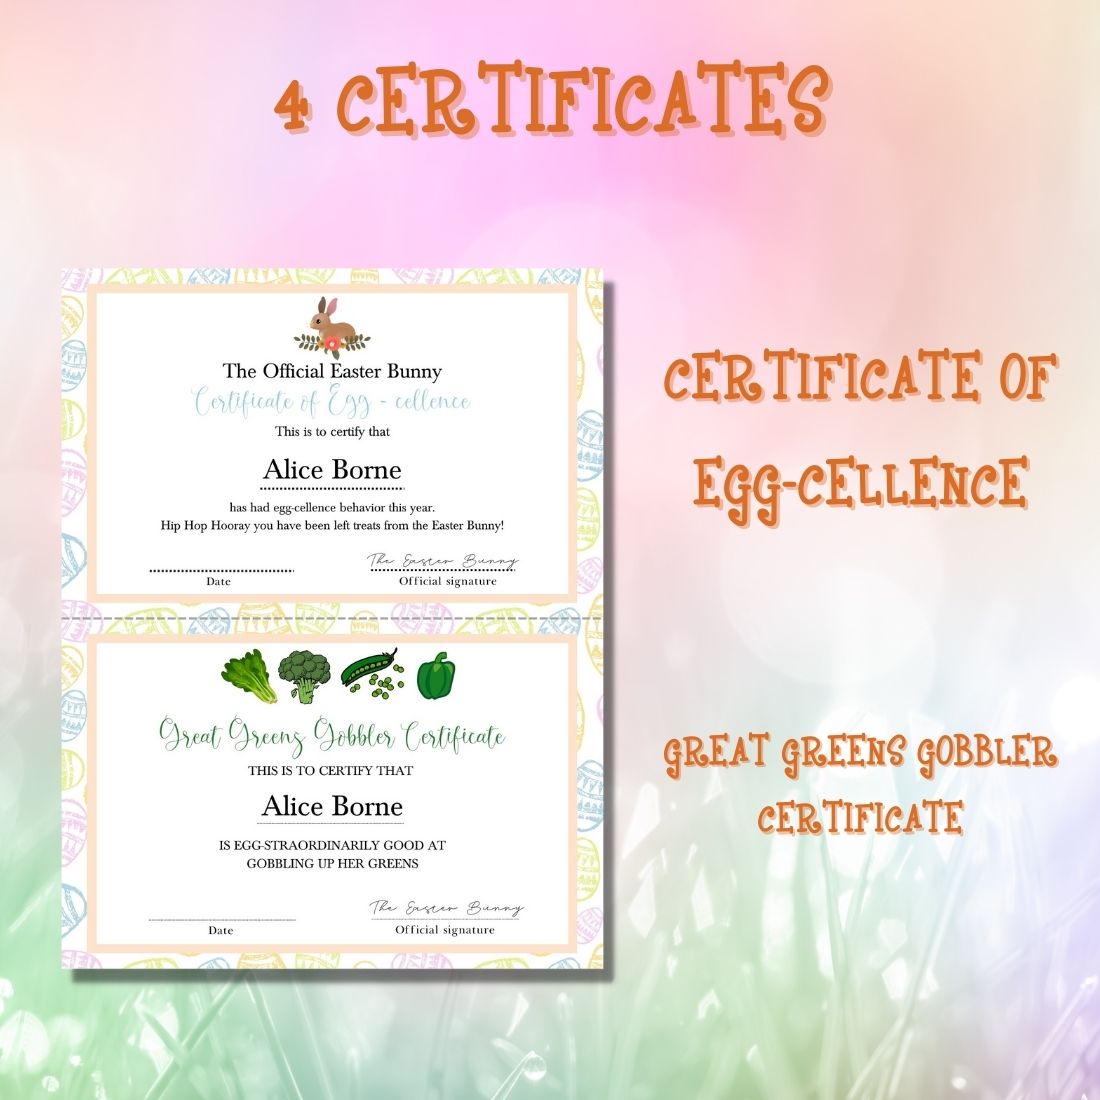 Certificate of an egg - cellence is shown.